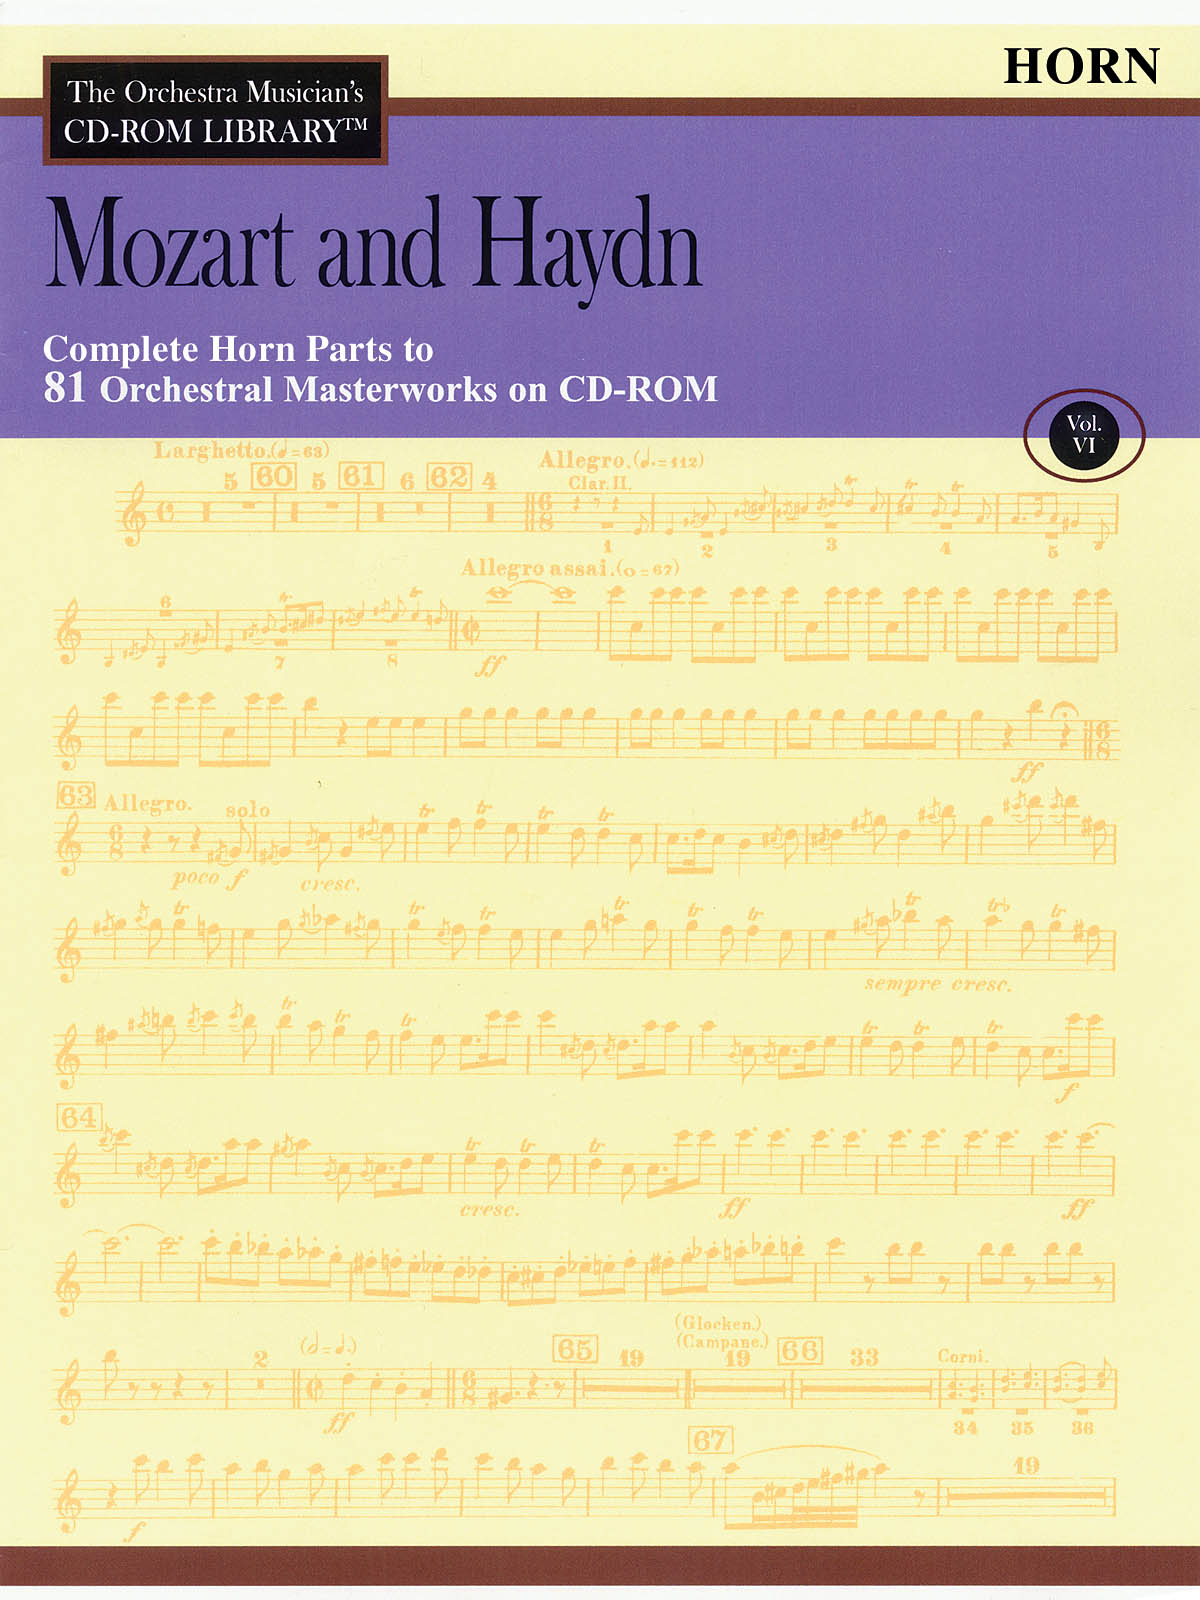 Mozart and Haydn - Volume 6(The Orchestra Musician's CD-ROM Library - Horn)